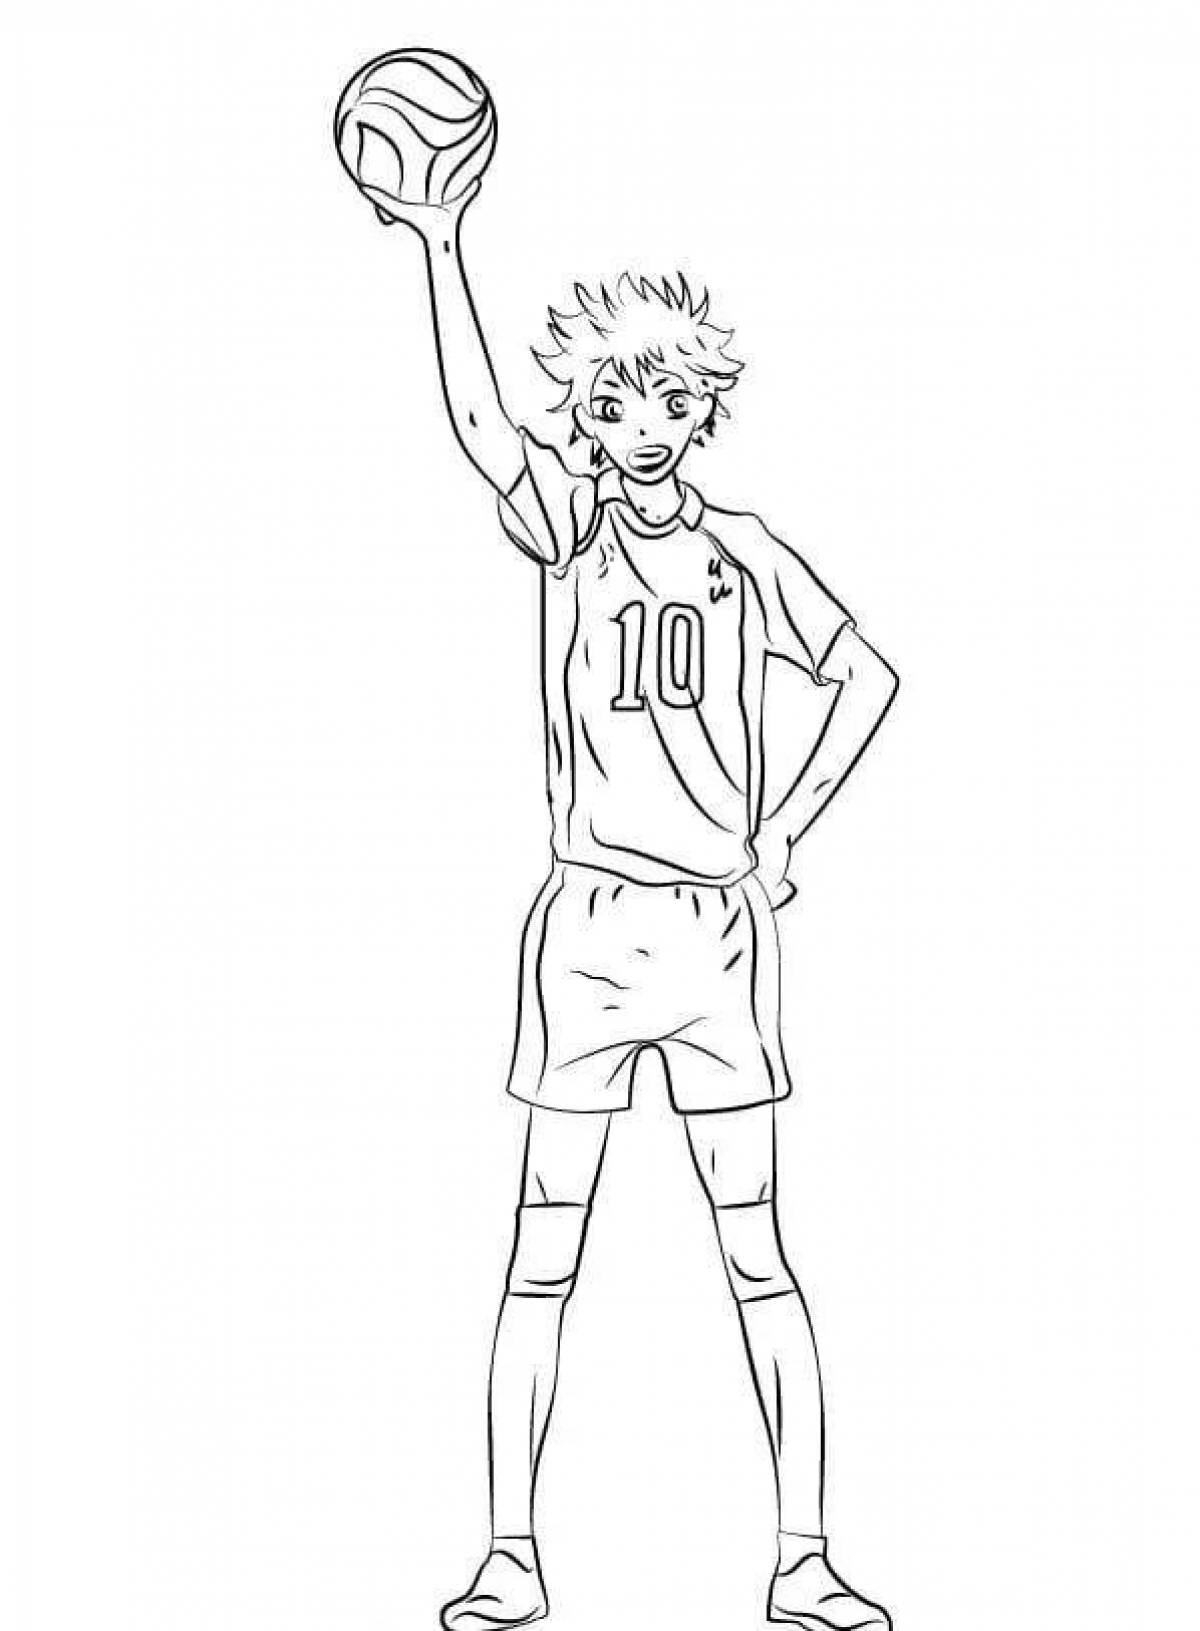 Lovely hinata shoes coloring page